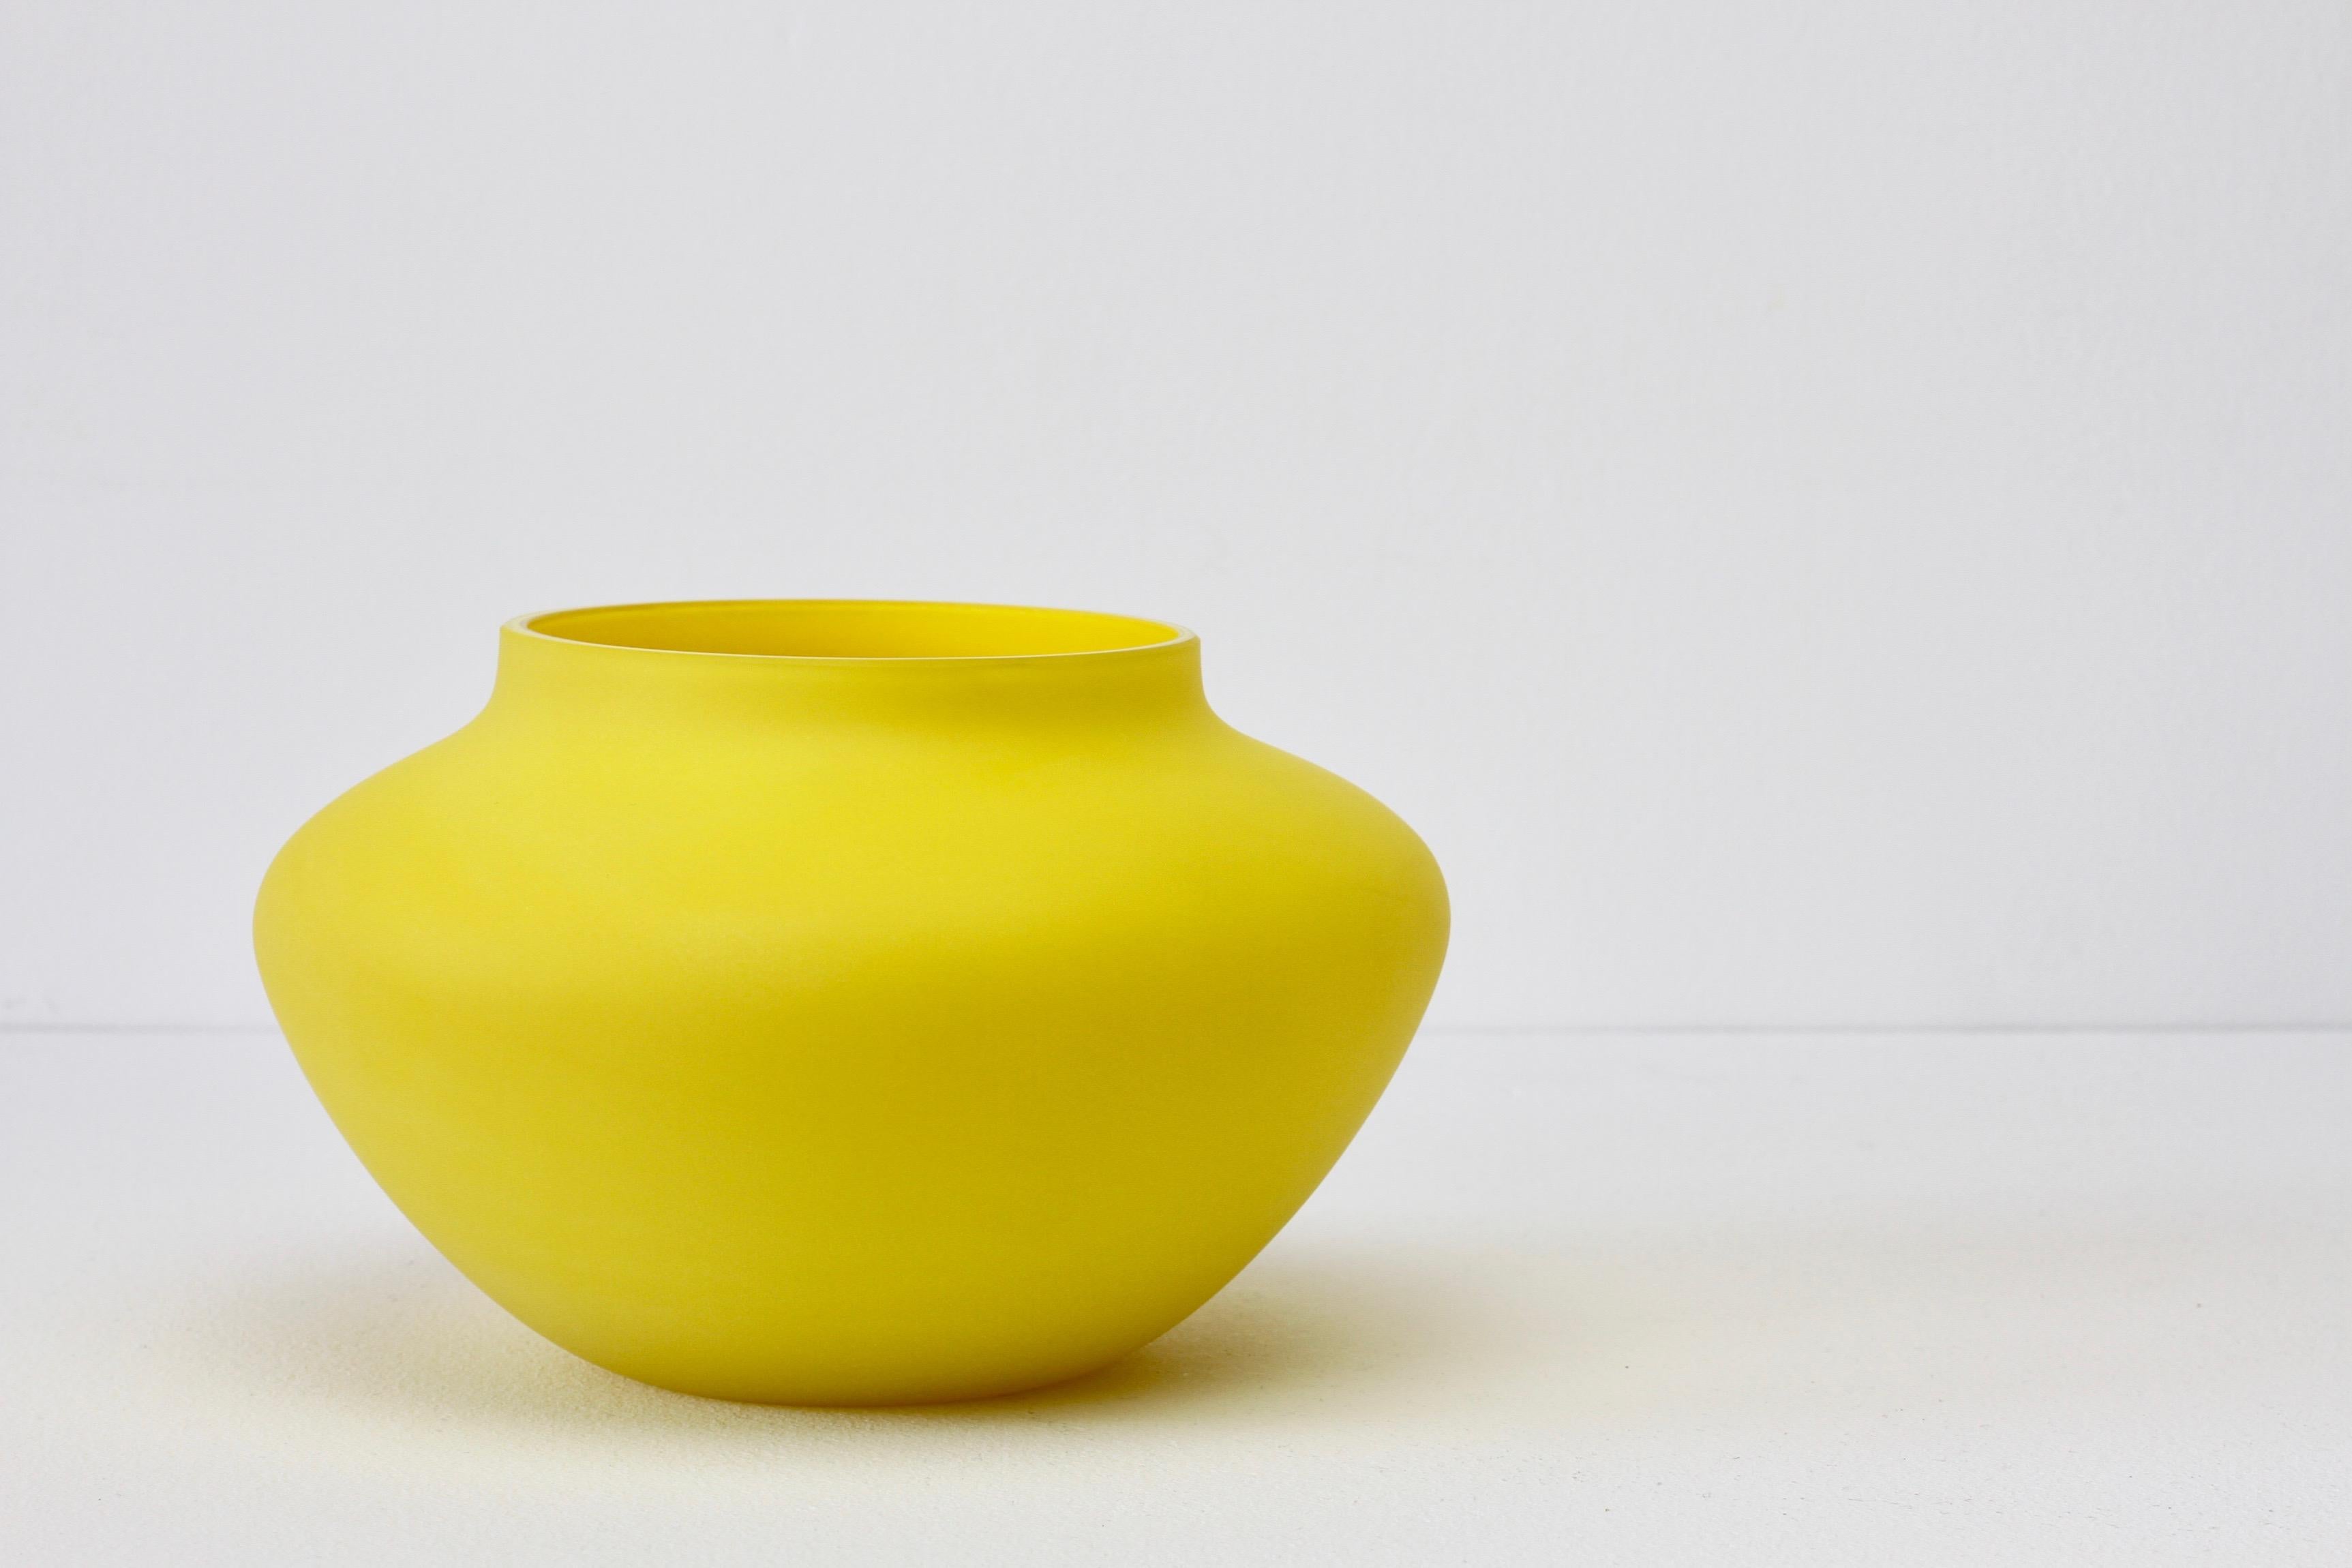 Cenedese midcentury Murano glass vase or vessel, made in Italy. Particularly striking is the simple yet elegant form - possesing the characteristics of hand thrown pottery with the unmistakable look and feel of glass.

A fun, funky and bright way